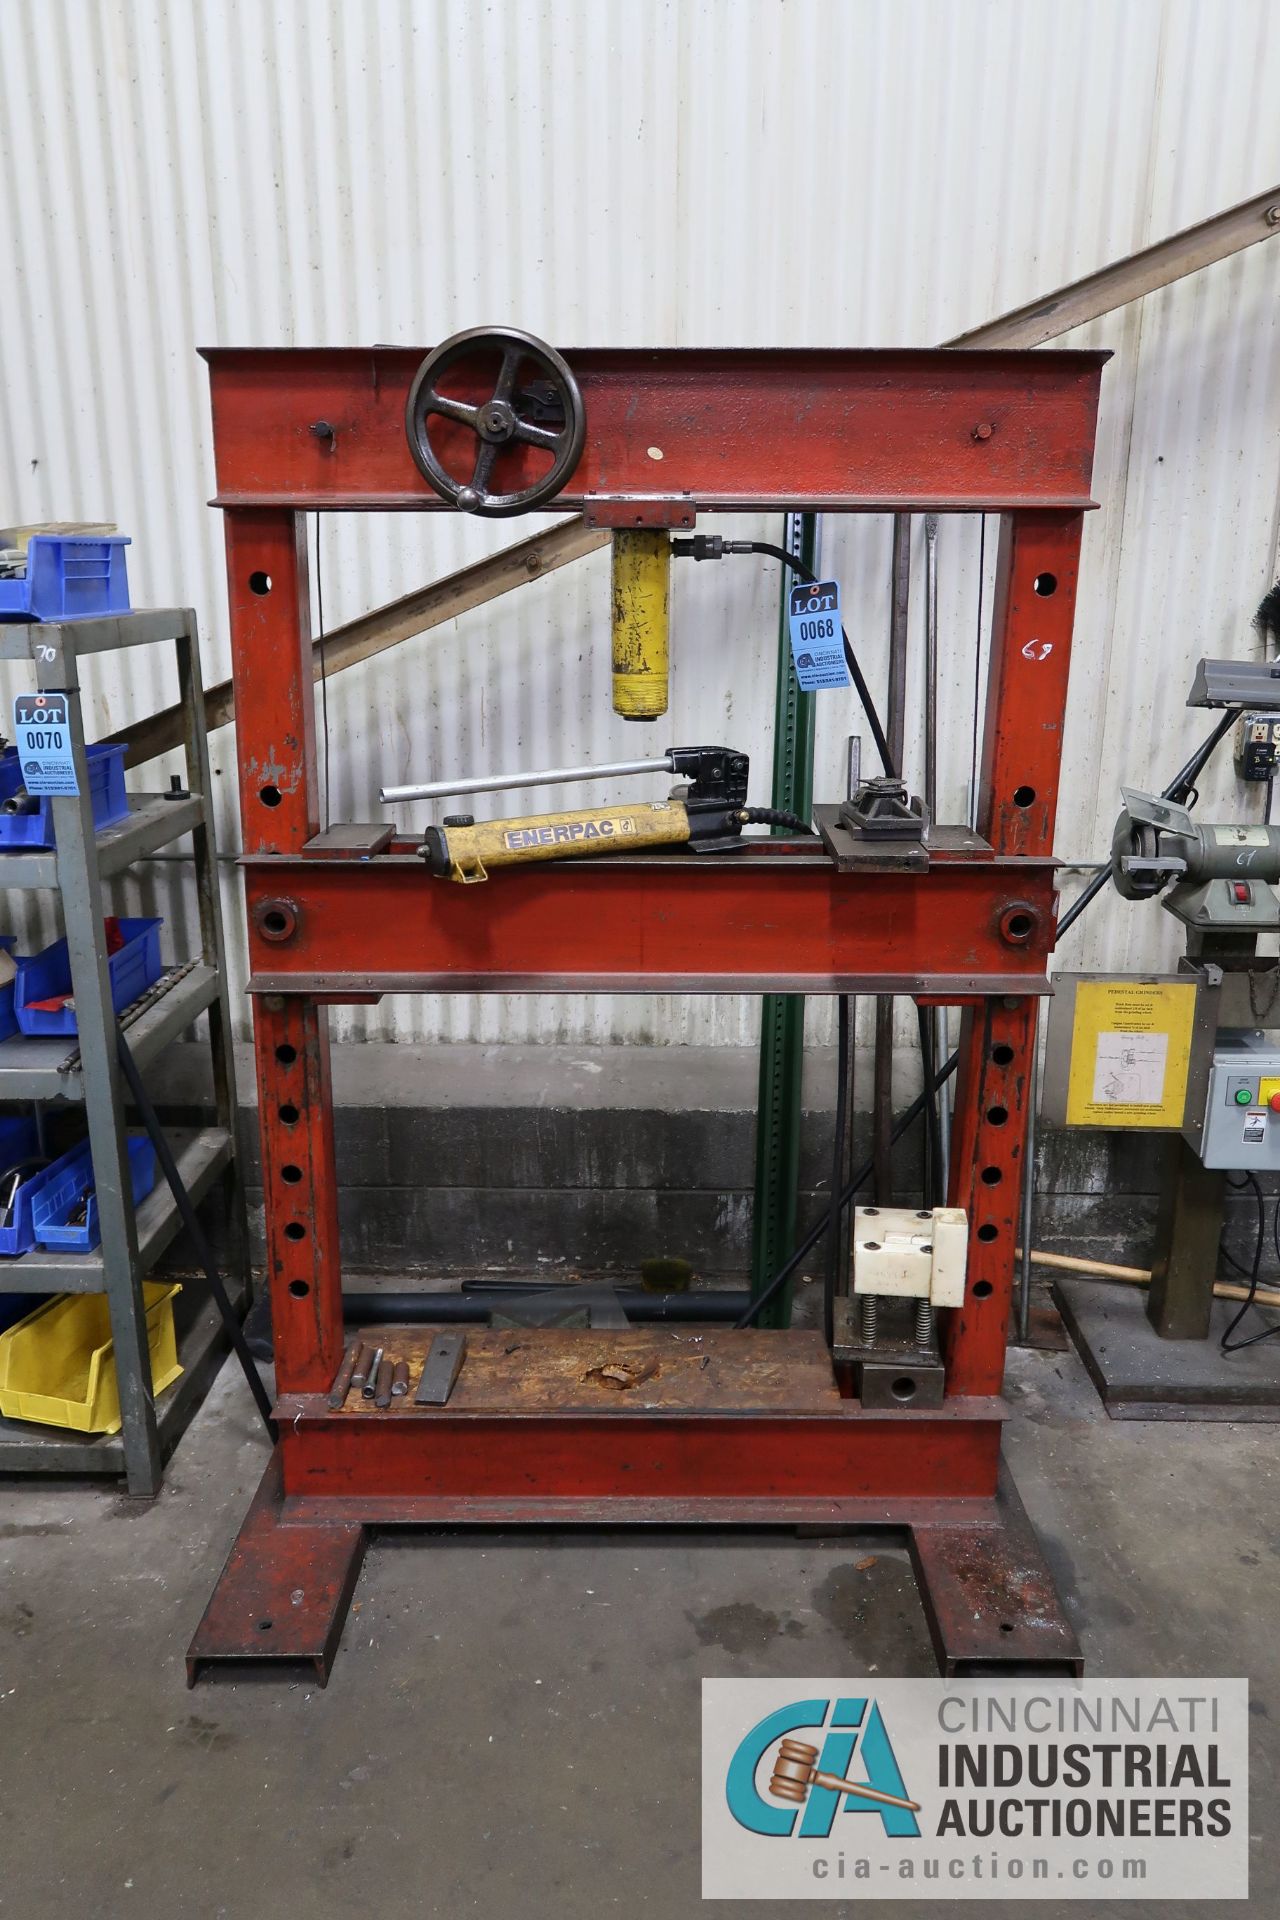 25 TON H-FRAME PRESS WITH 25 TON ENERPAC HYDRAULIC JACK AND HAND PUMP